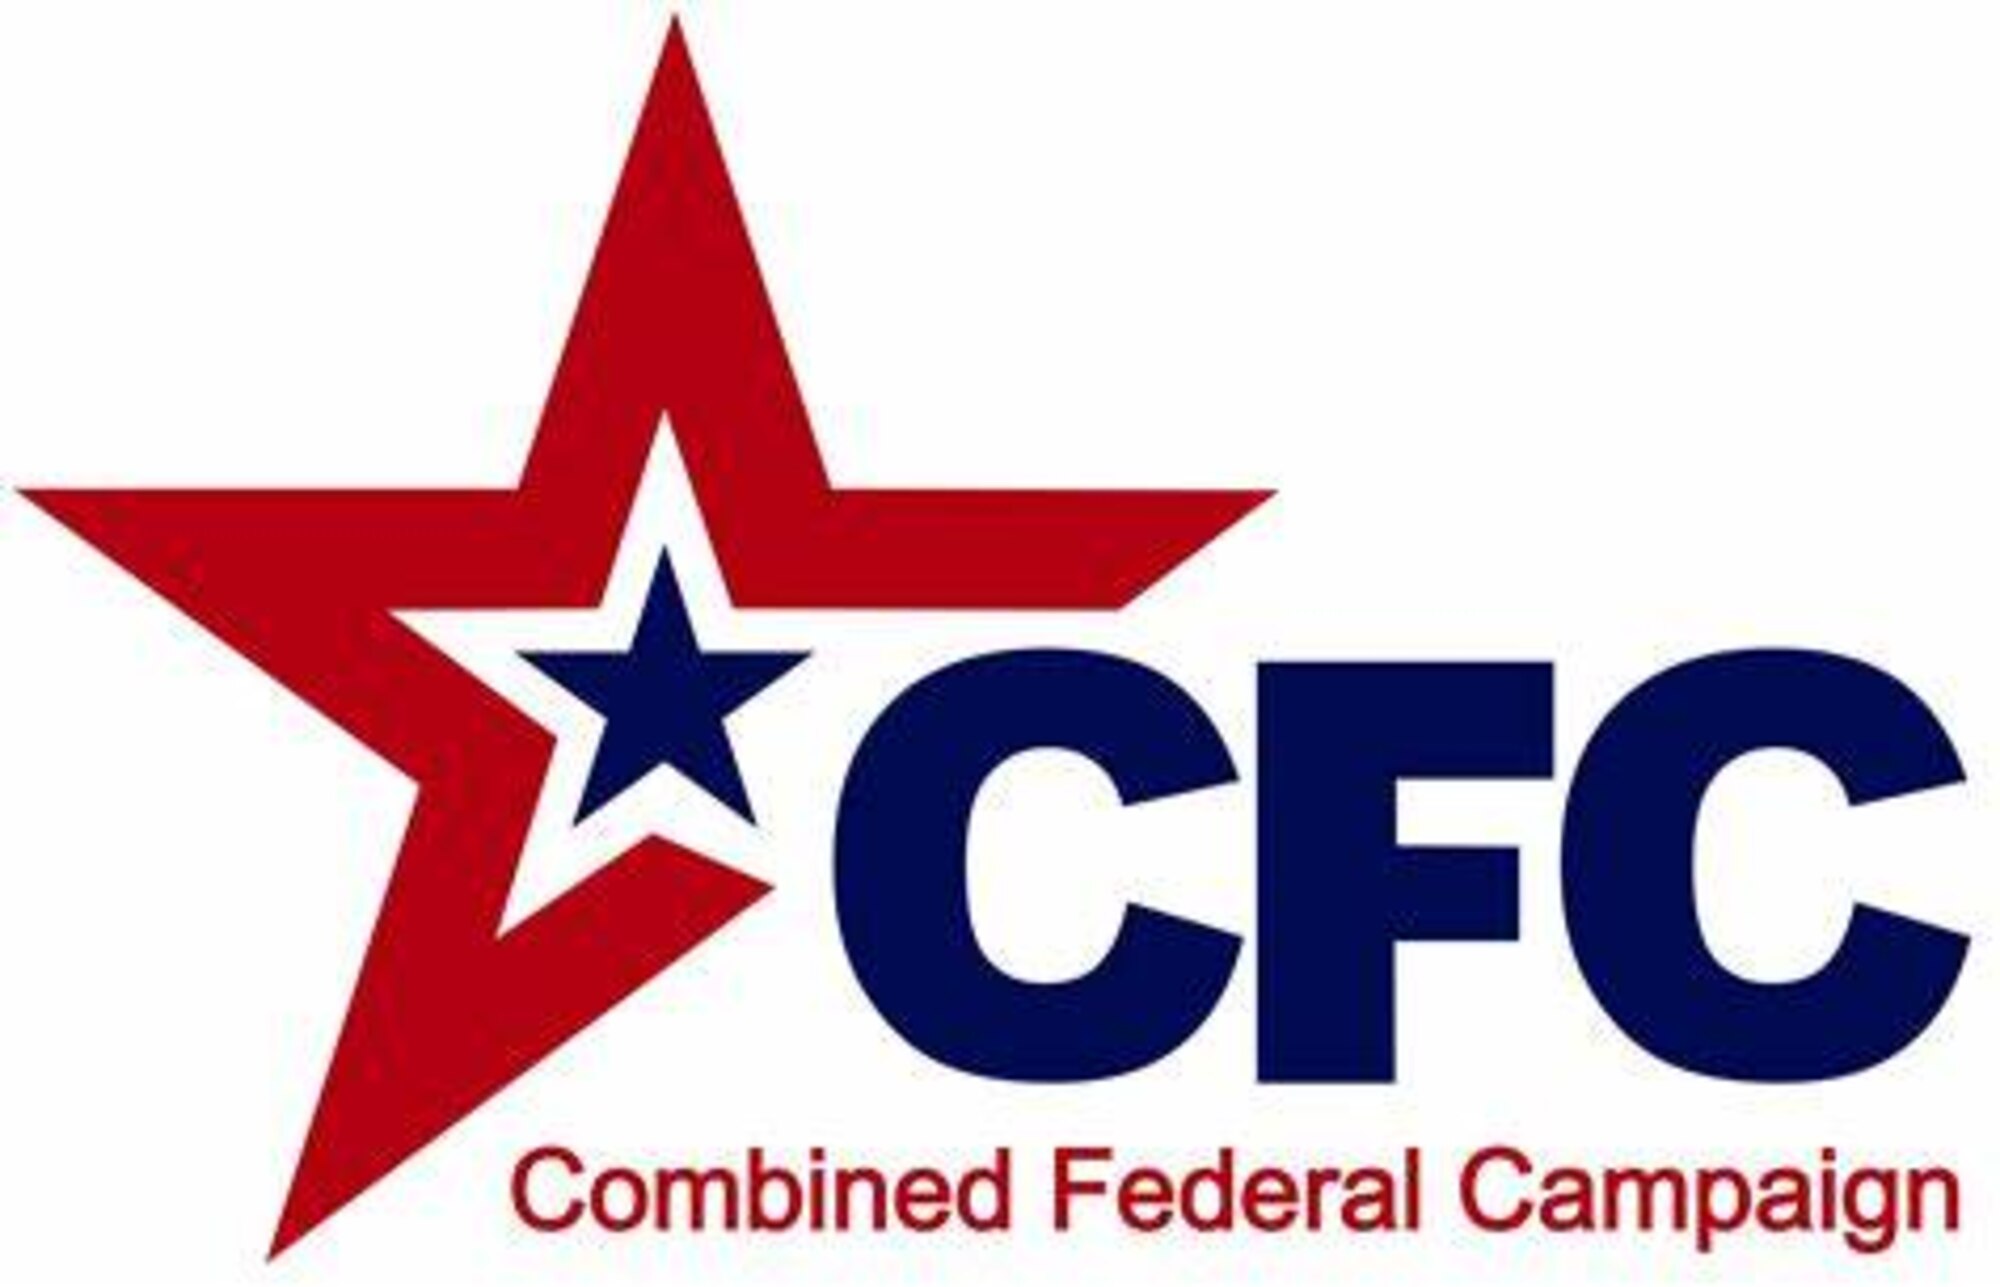 The CFC is a method for federal employees, military and civilian, to donate to qualifying charities. The Combined Federal Campaign is a 58-year Federal workplace giving tradition that has raised more than $8.3 billion for charitable organizations.